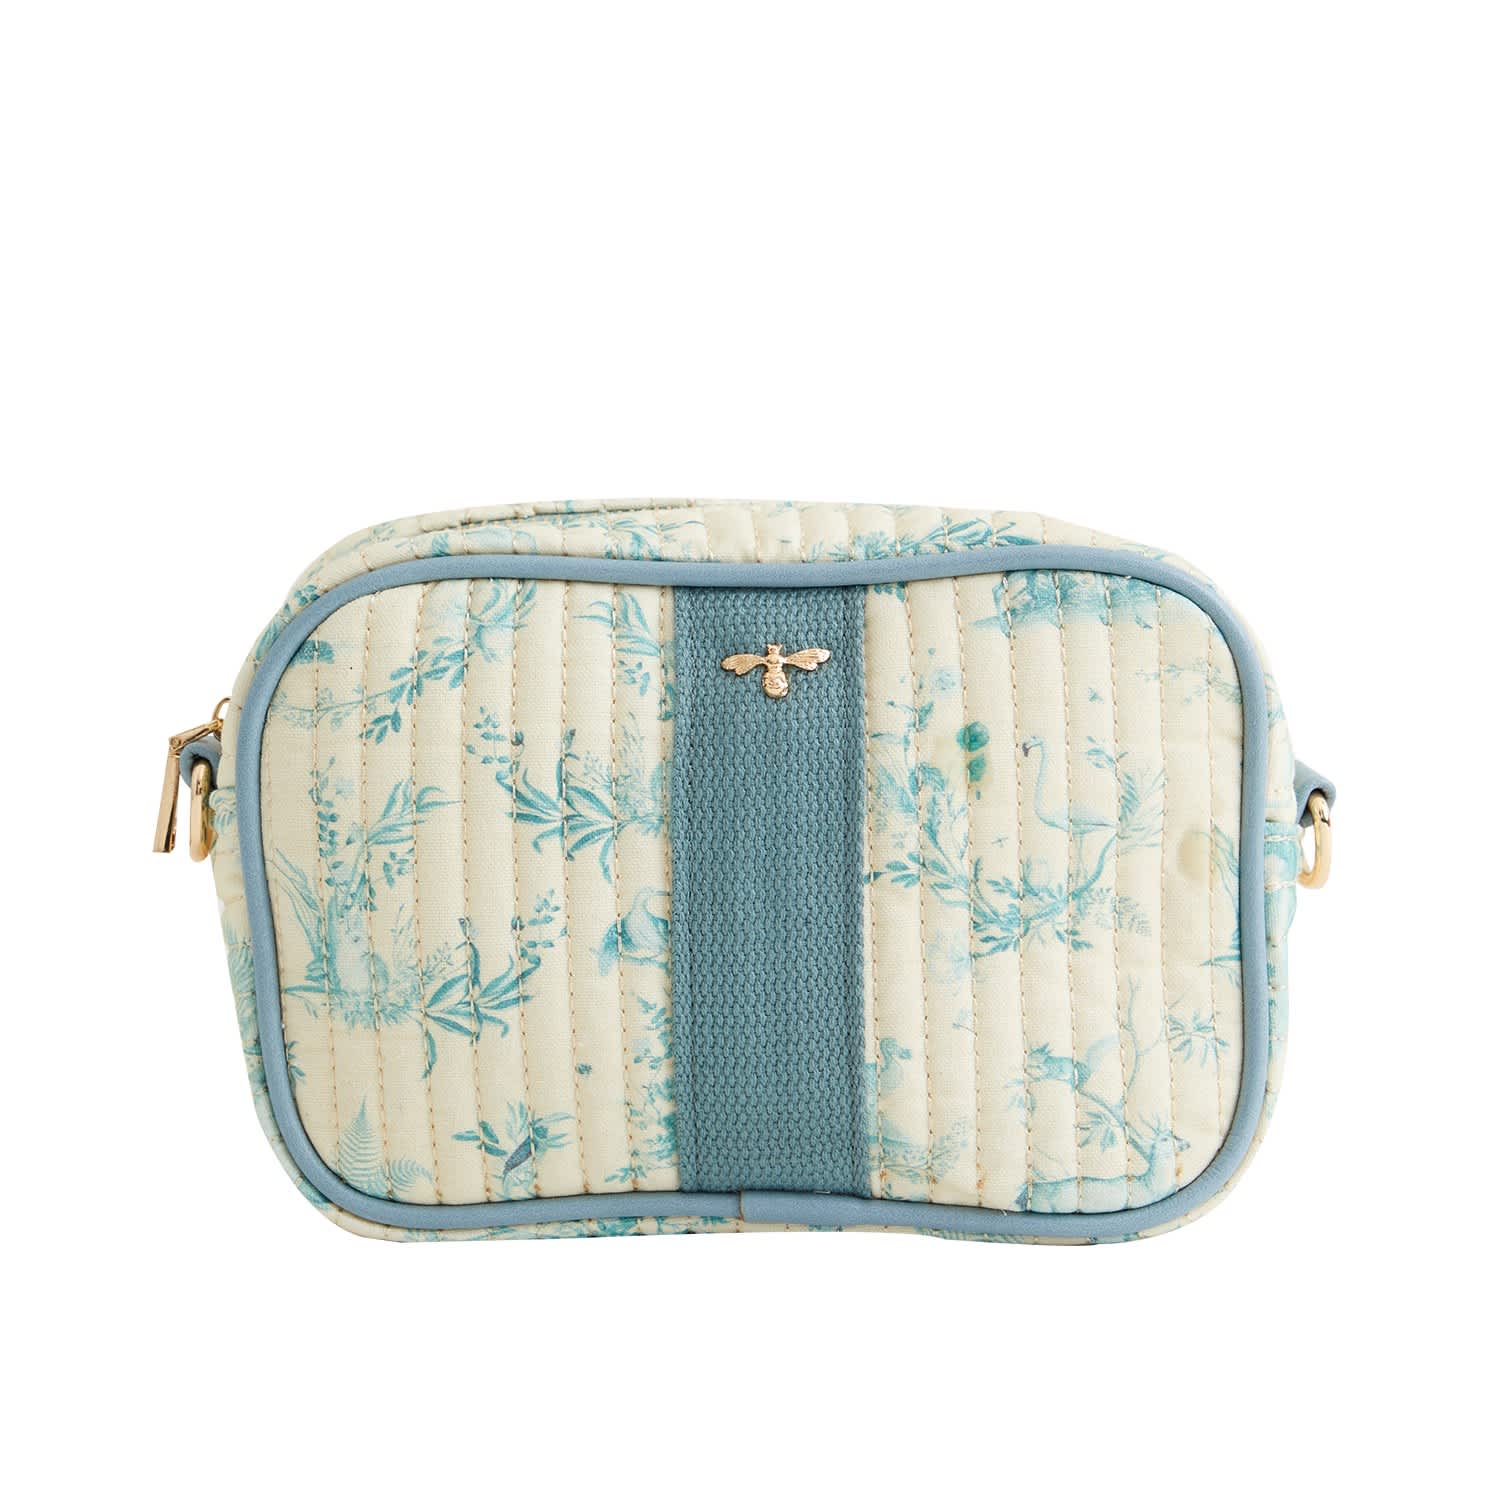 Toile de Jouy Camera Bag - Stanford Health Care Gift Shop